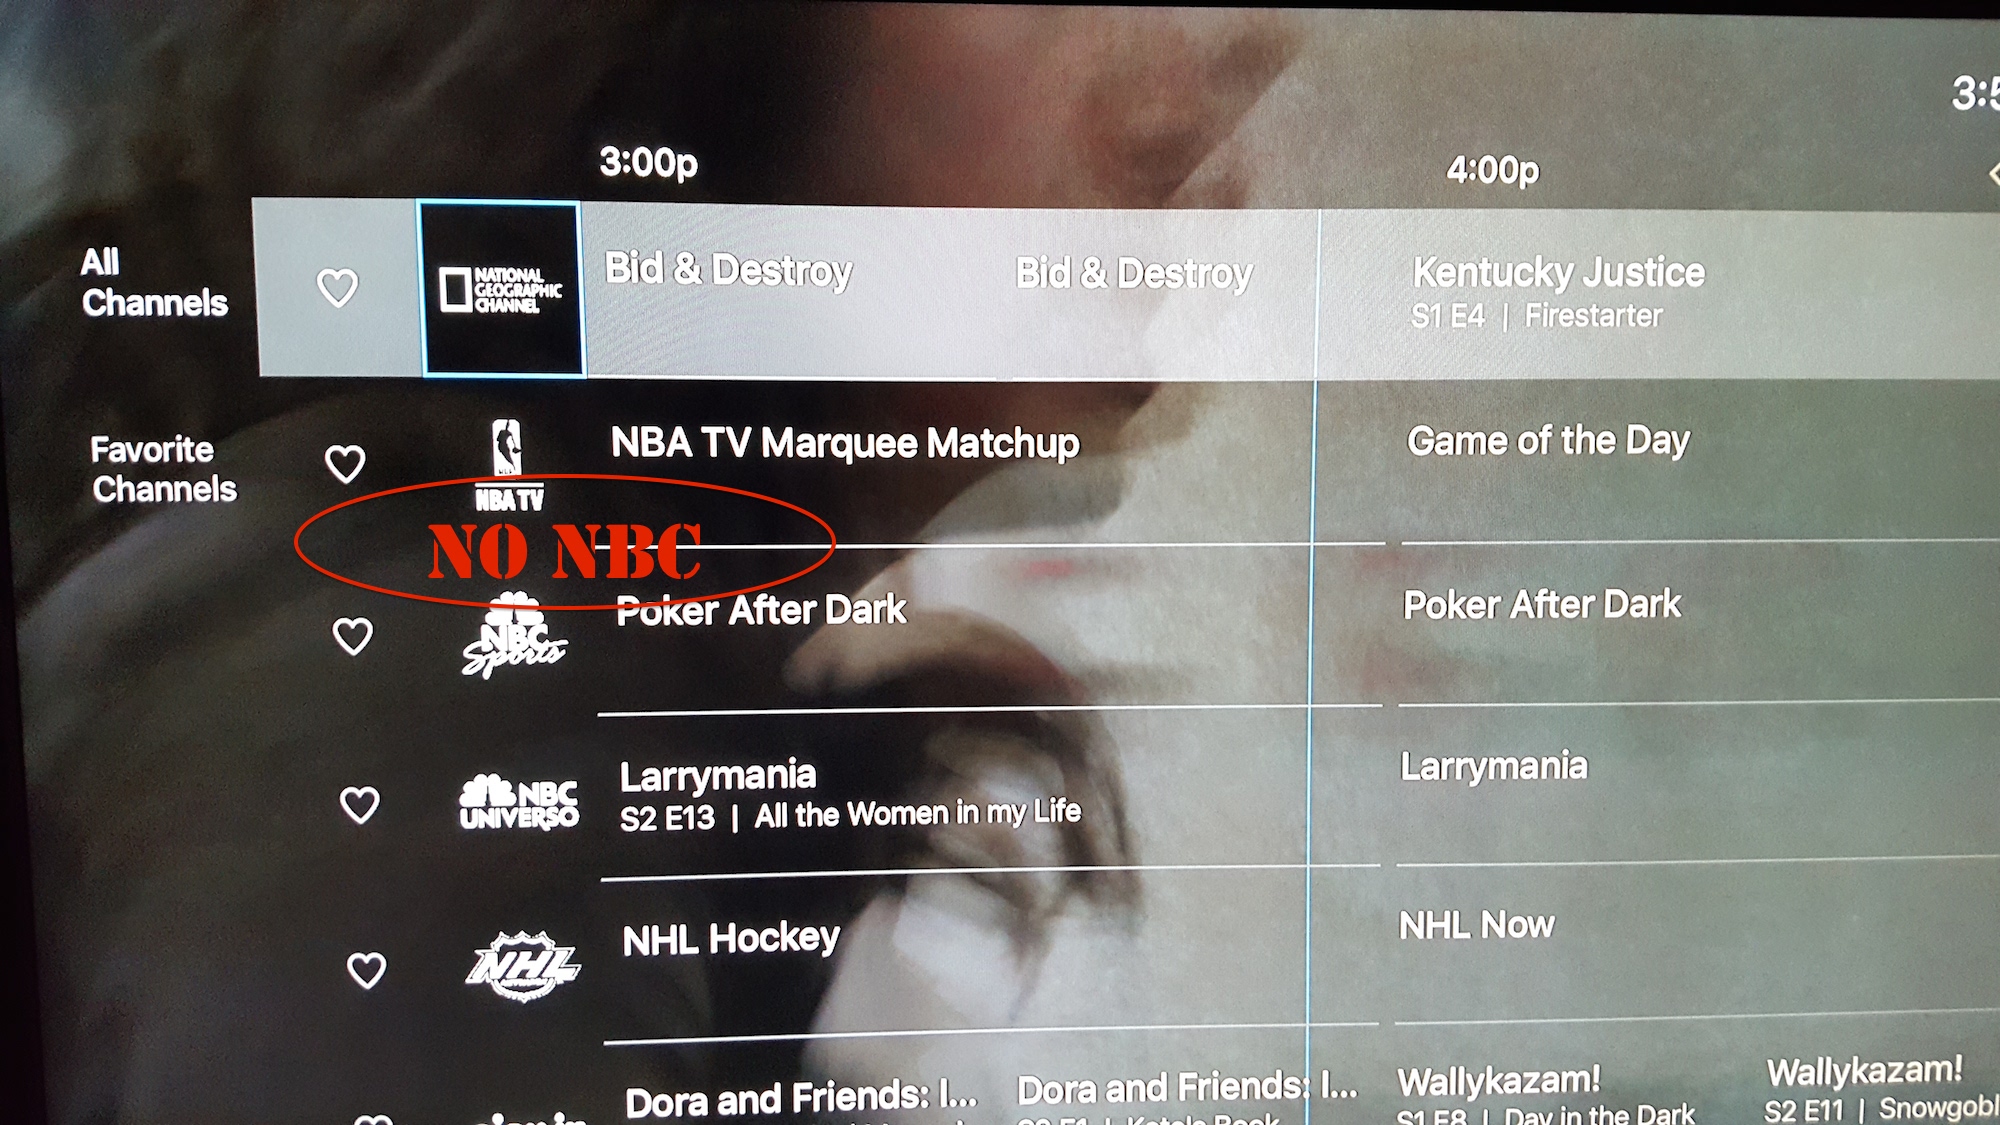 AT&T Confirms Live Access To NBC Is Still Mobile-Only On ‘DirecTV Now’